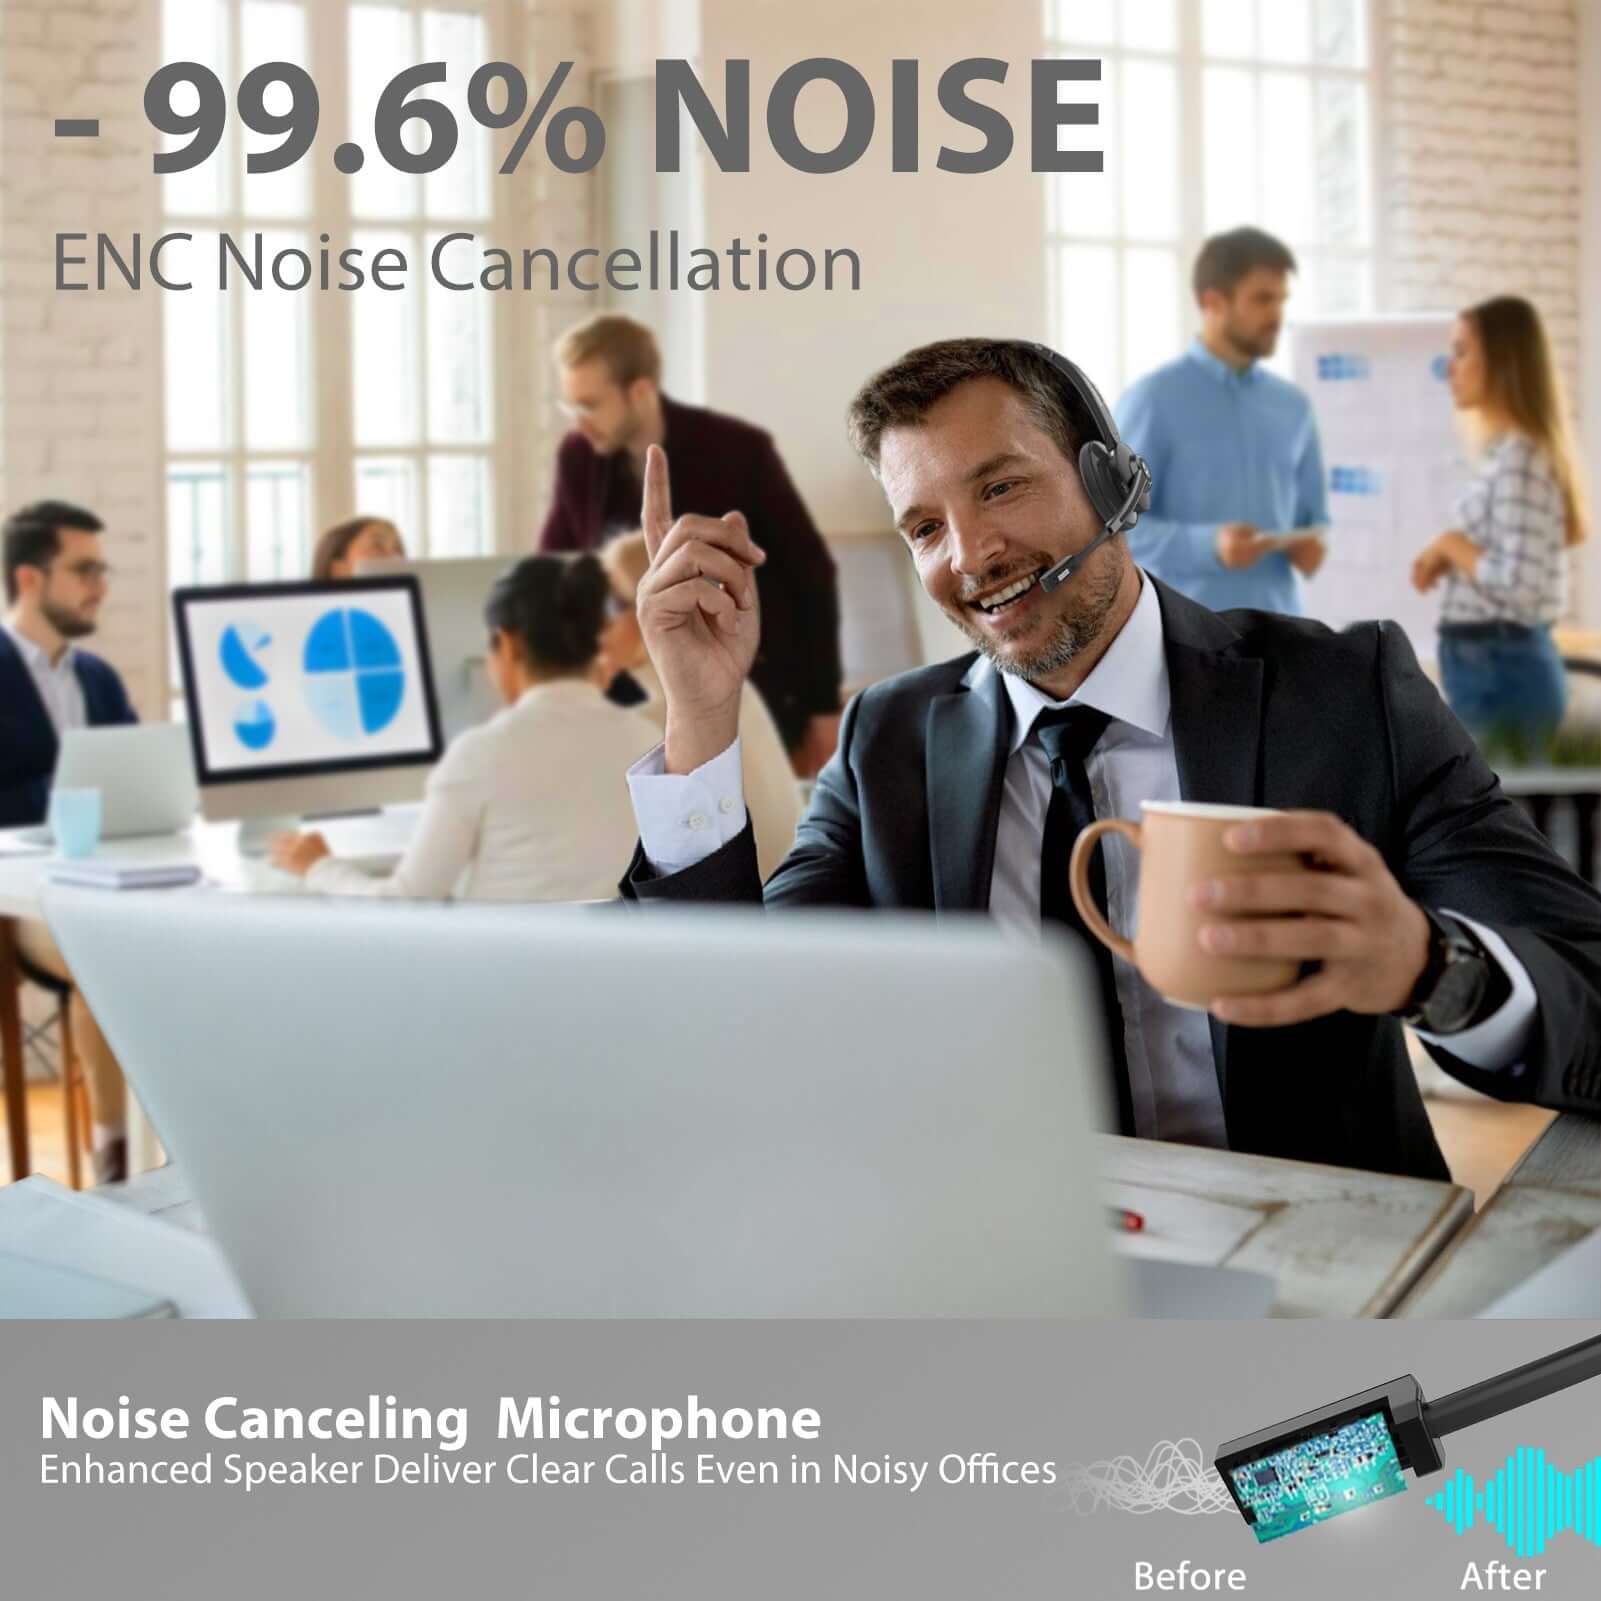 -99.6% noise,ENC Noise cancellation,Noise canceling microphone,Enhanced speaker deliver clear calls even in noisy offices.